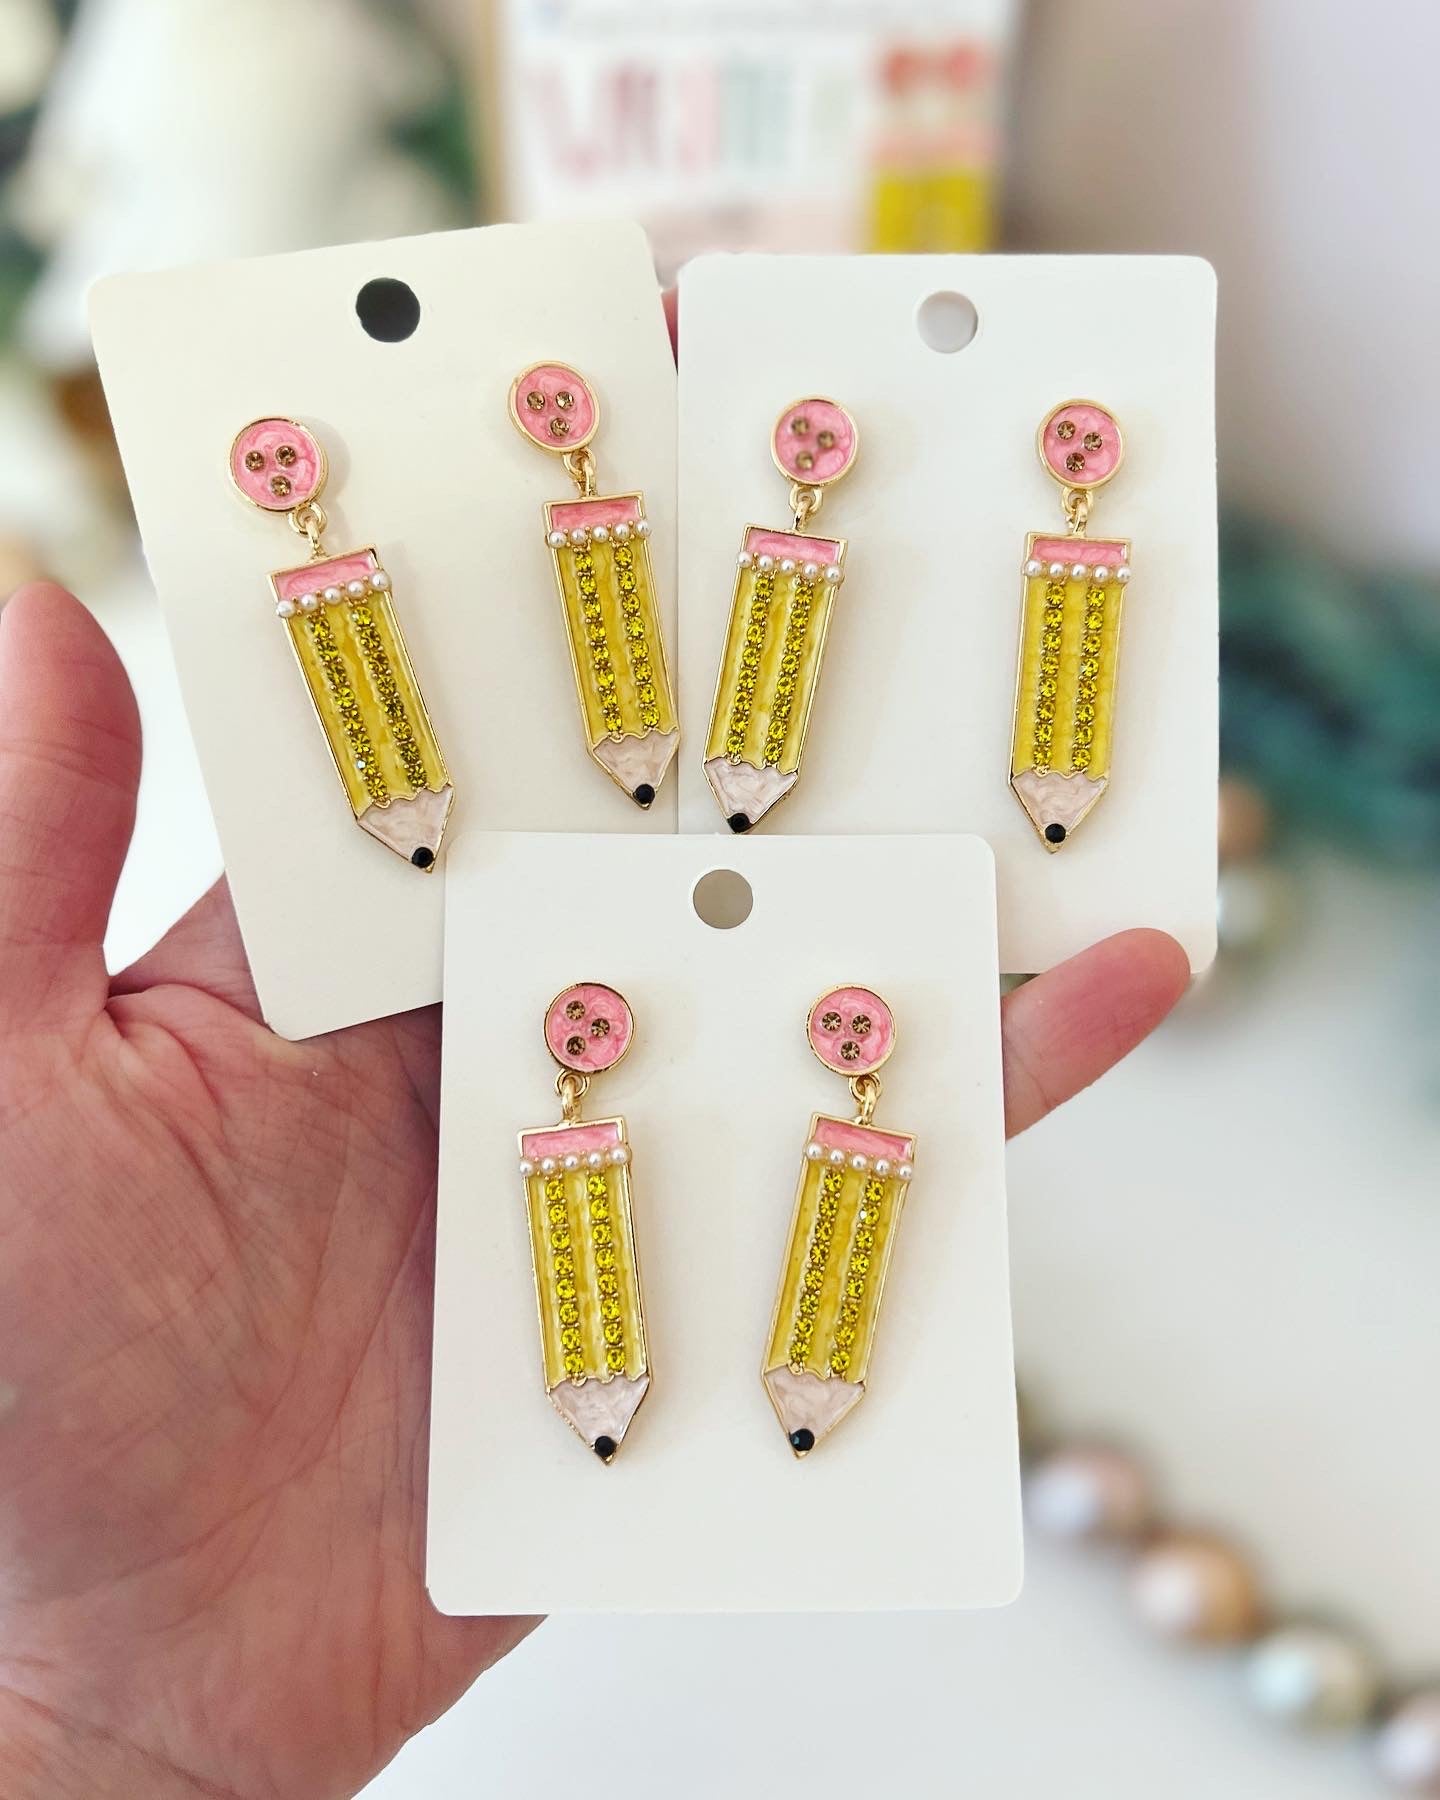 Thanks for starting the year off "Write!" Teacher Pencil Earrings!